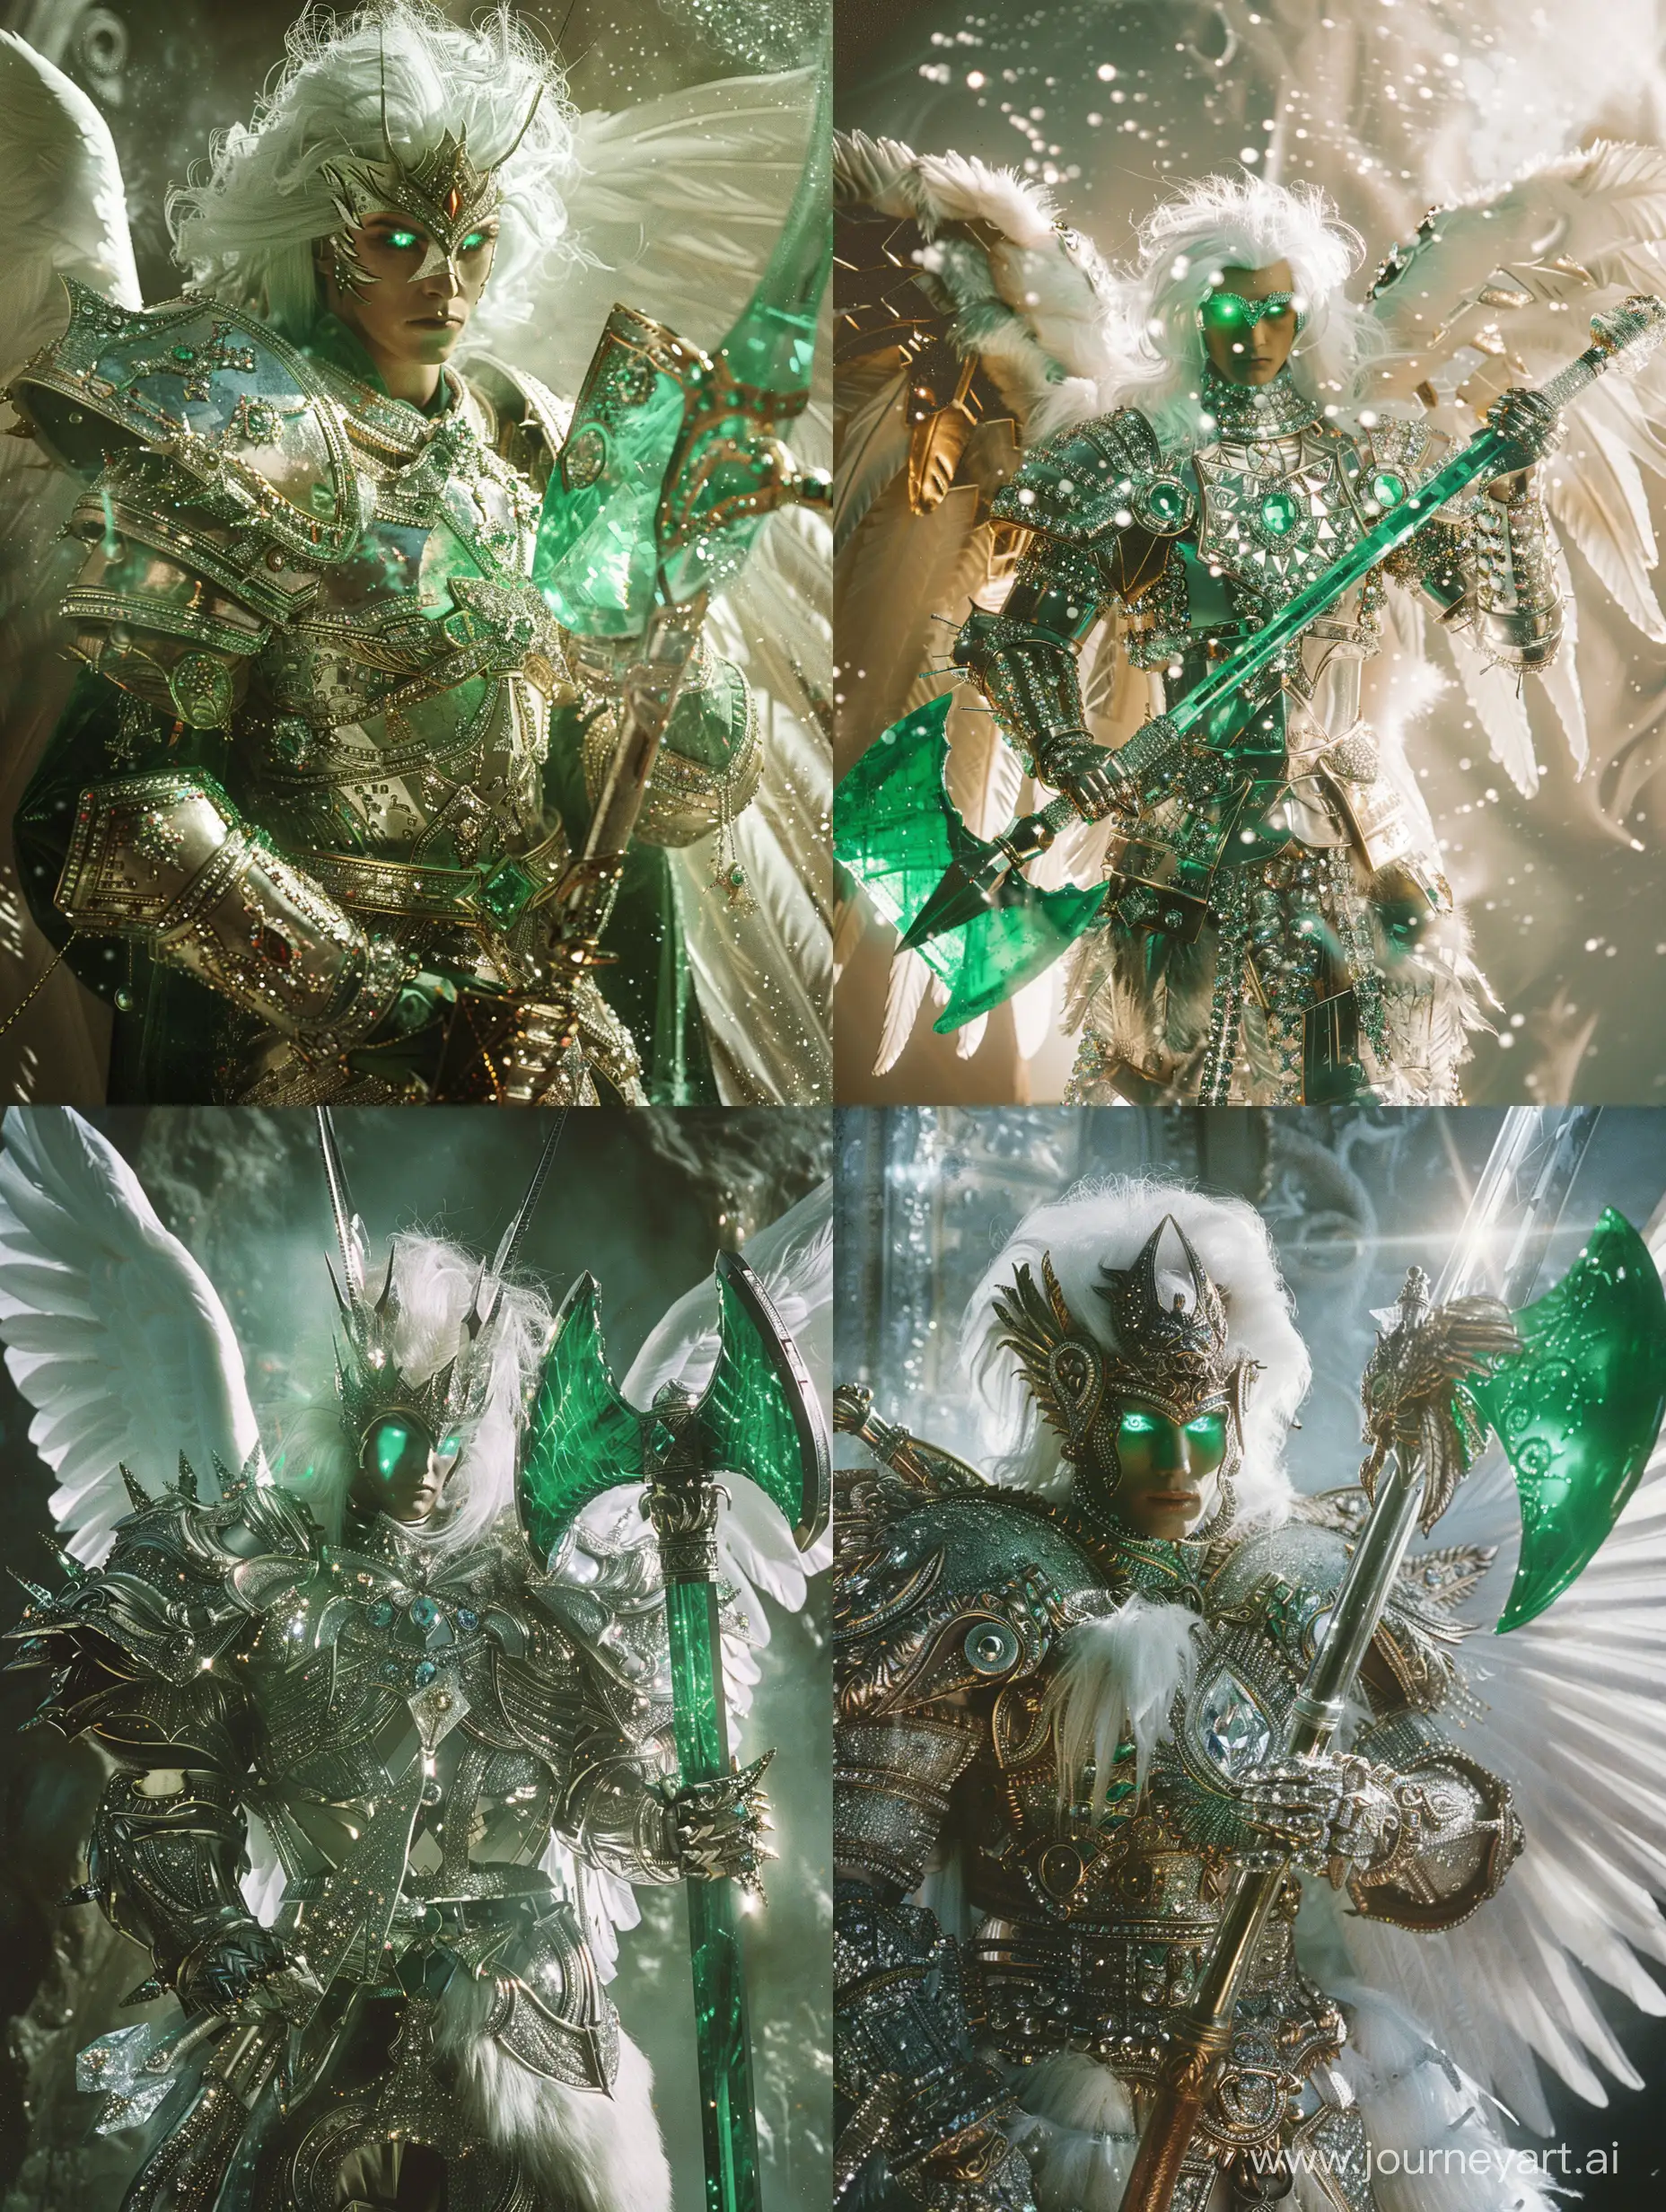 A fantasy medieval knight king-god with bright emerald green, luscious white hair eyes, angel wings wearing beautiful diamond armor, holding a Waterford crystal glass sword, with a large emerald battle axe on his back, 1990s film photo, film grain, light leaks reflecting in the armor, and weapons